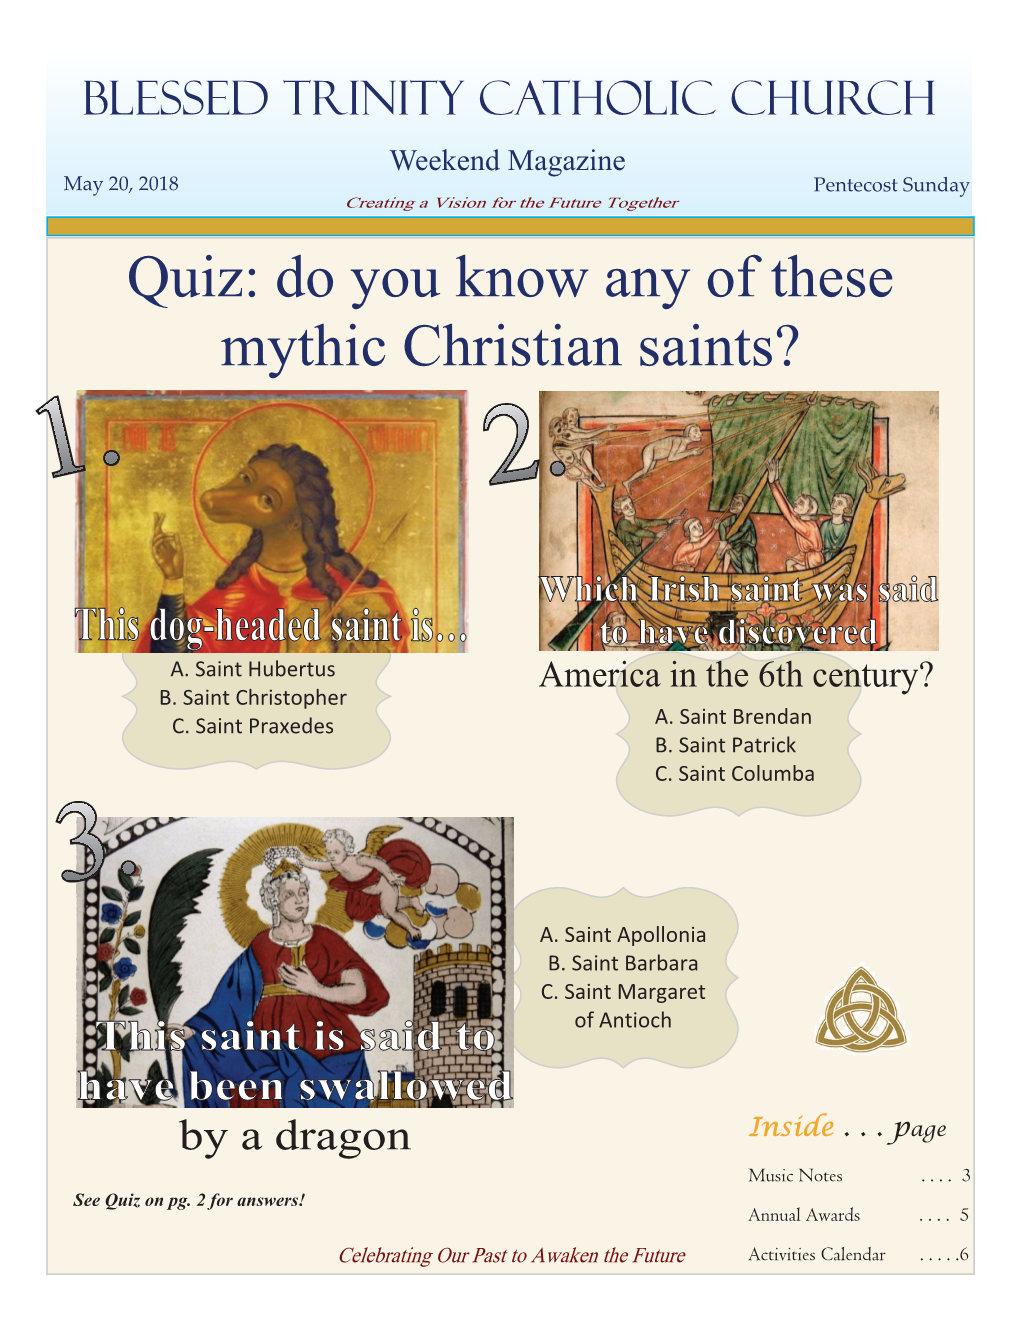 Quiz: Do You Know Any of These Mythic Christian Saints?